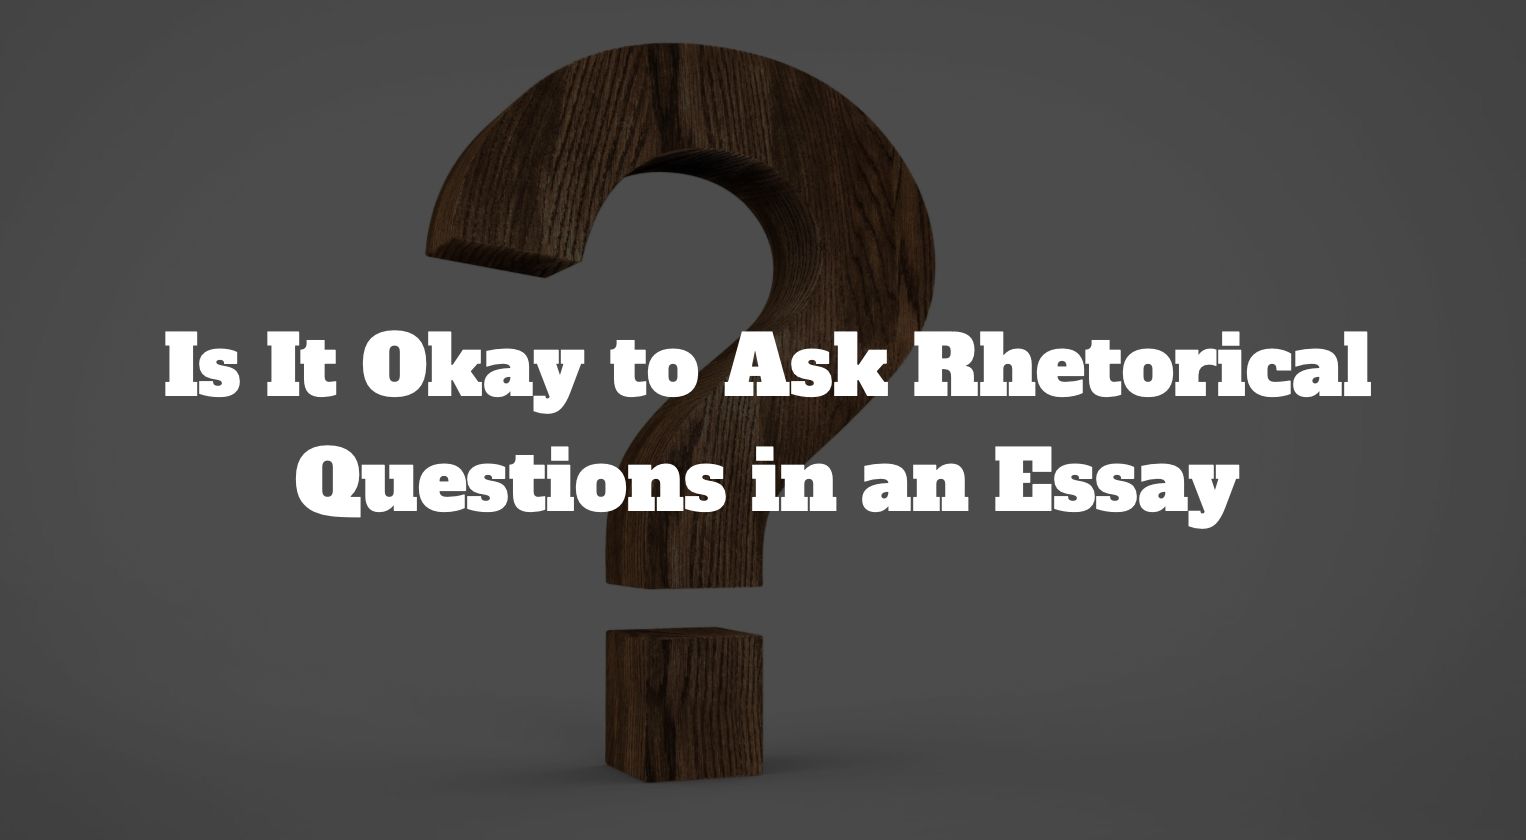 use of Rhetorical Questions in essays